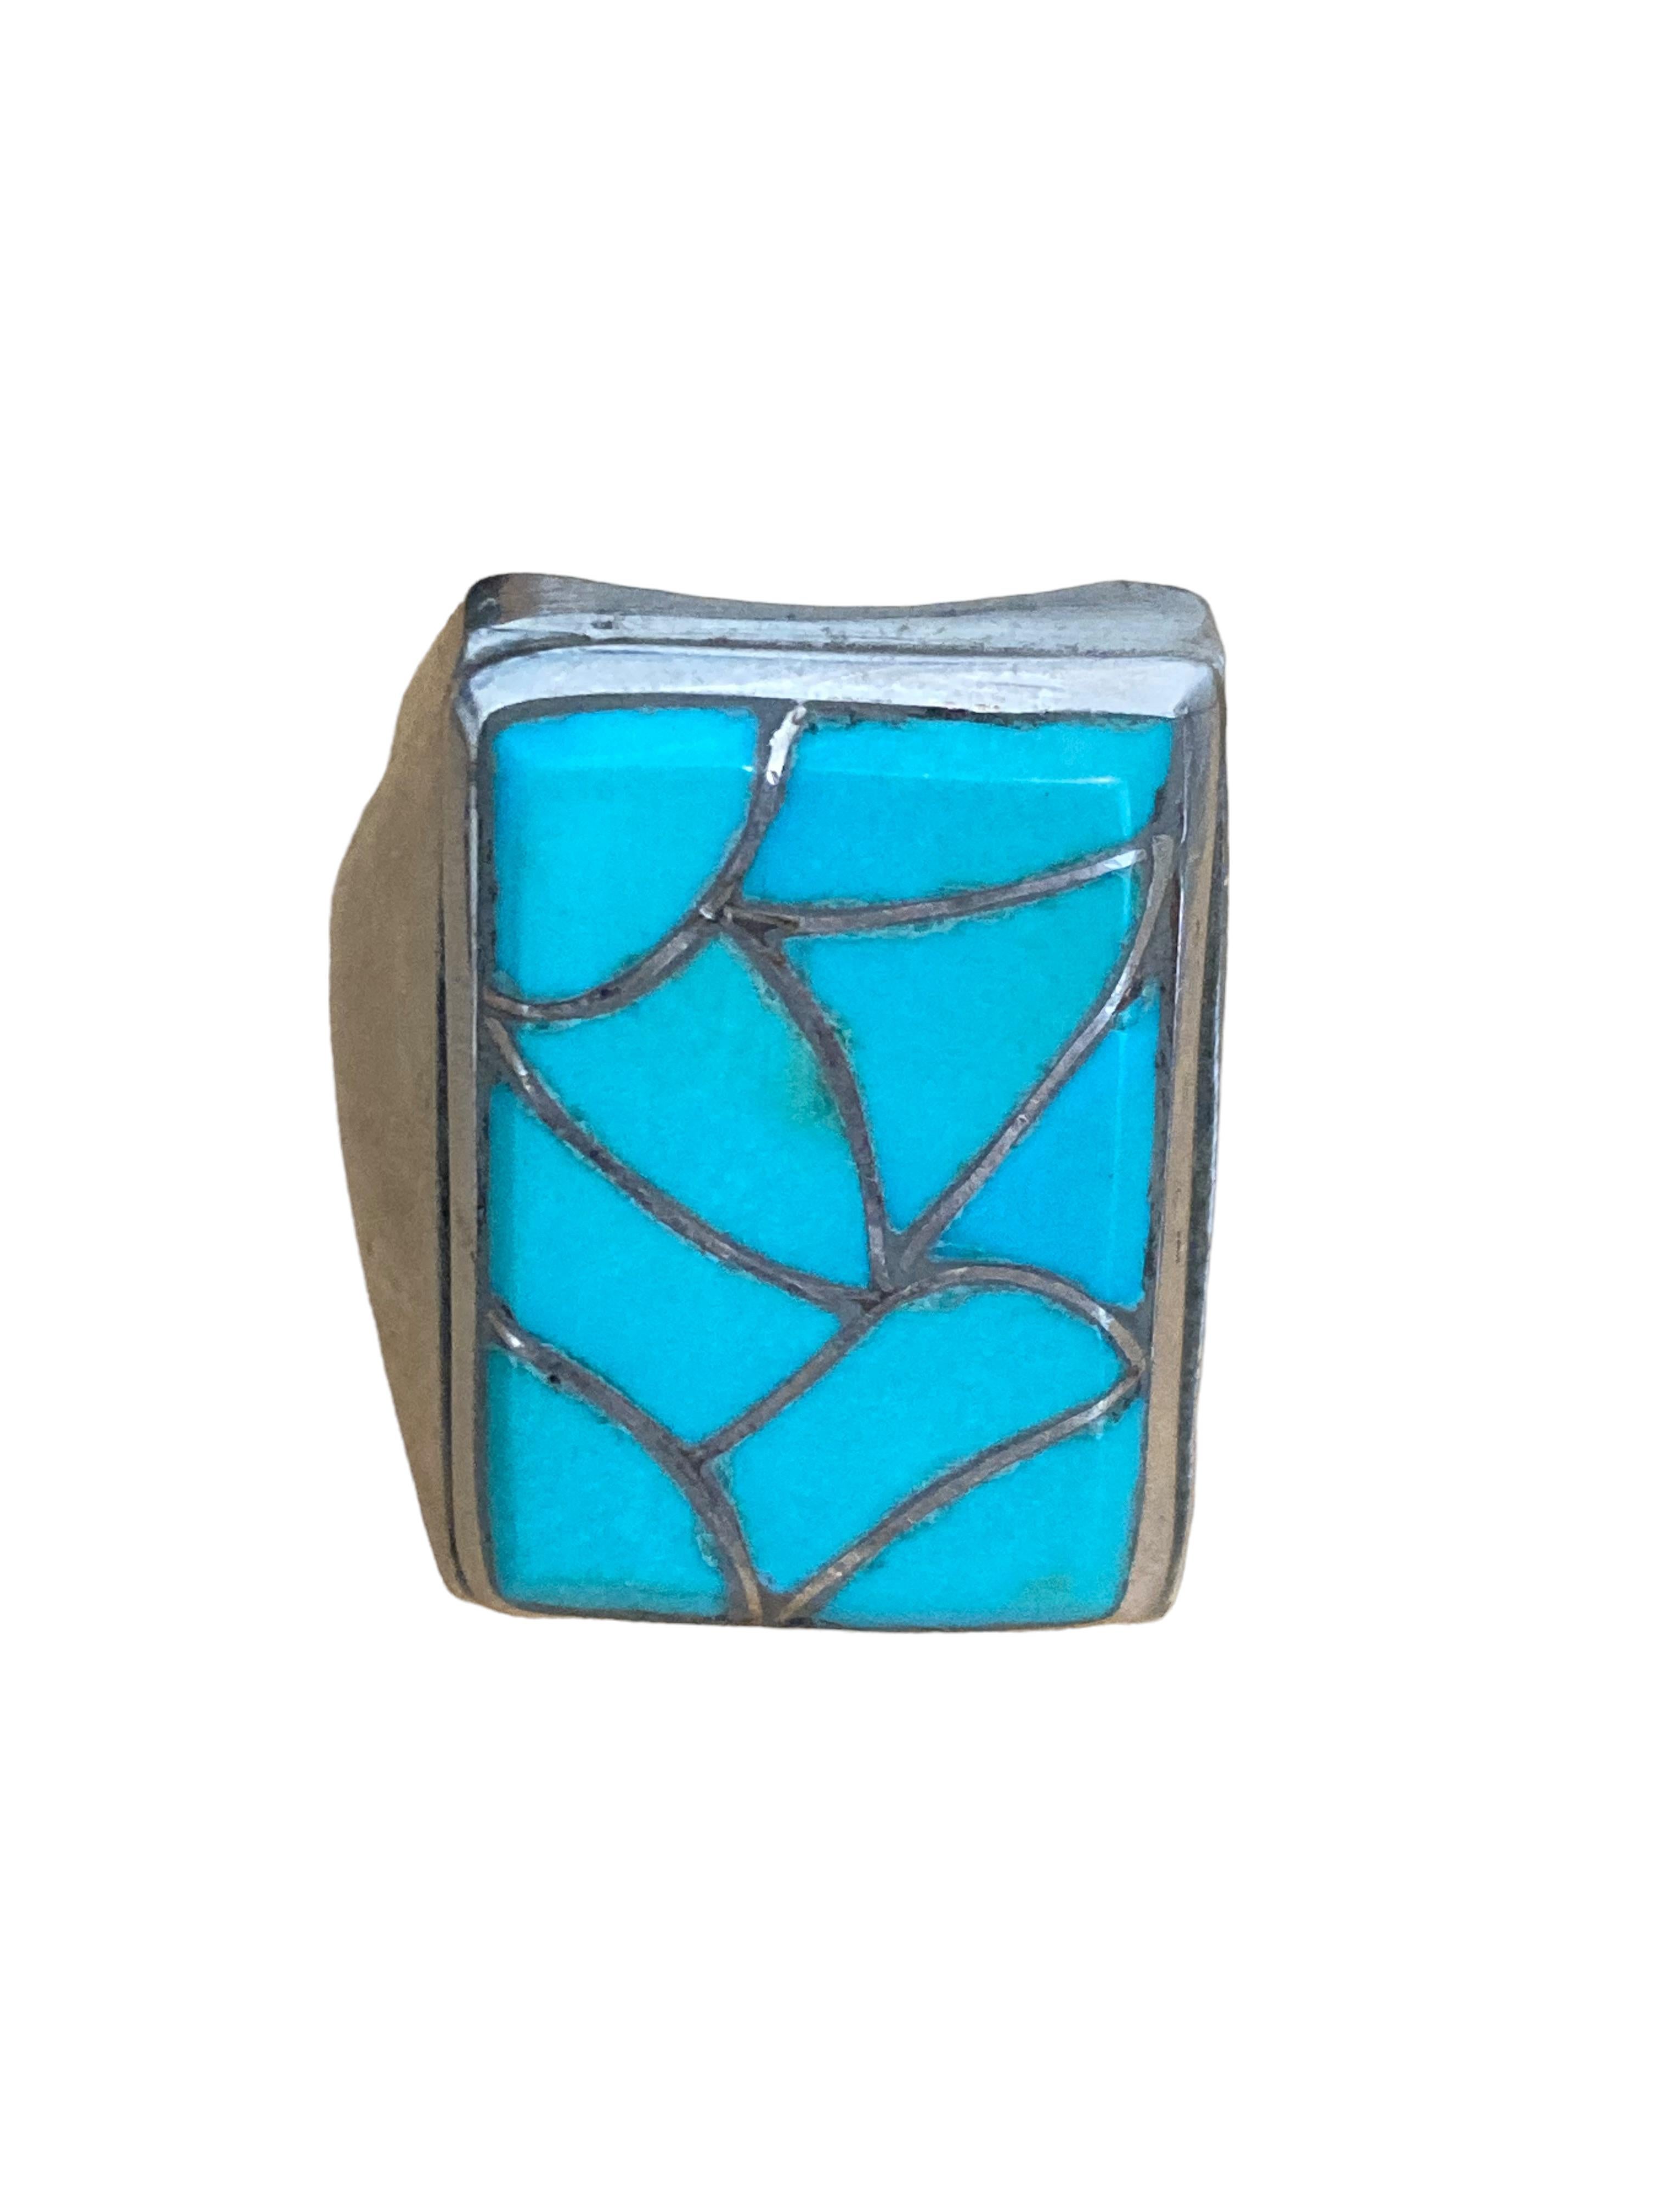 This Vintage, Men's, Native American, Sterling Silver Ring was made by Zuni silversmith Emma Bonney, circa 1960s.  Sleeping Beauty turquoise is no longer mined, resulting in the gem becoming highly desired and valuable. The ring has a handsome,